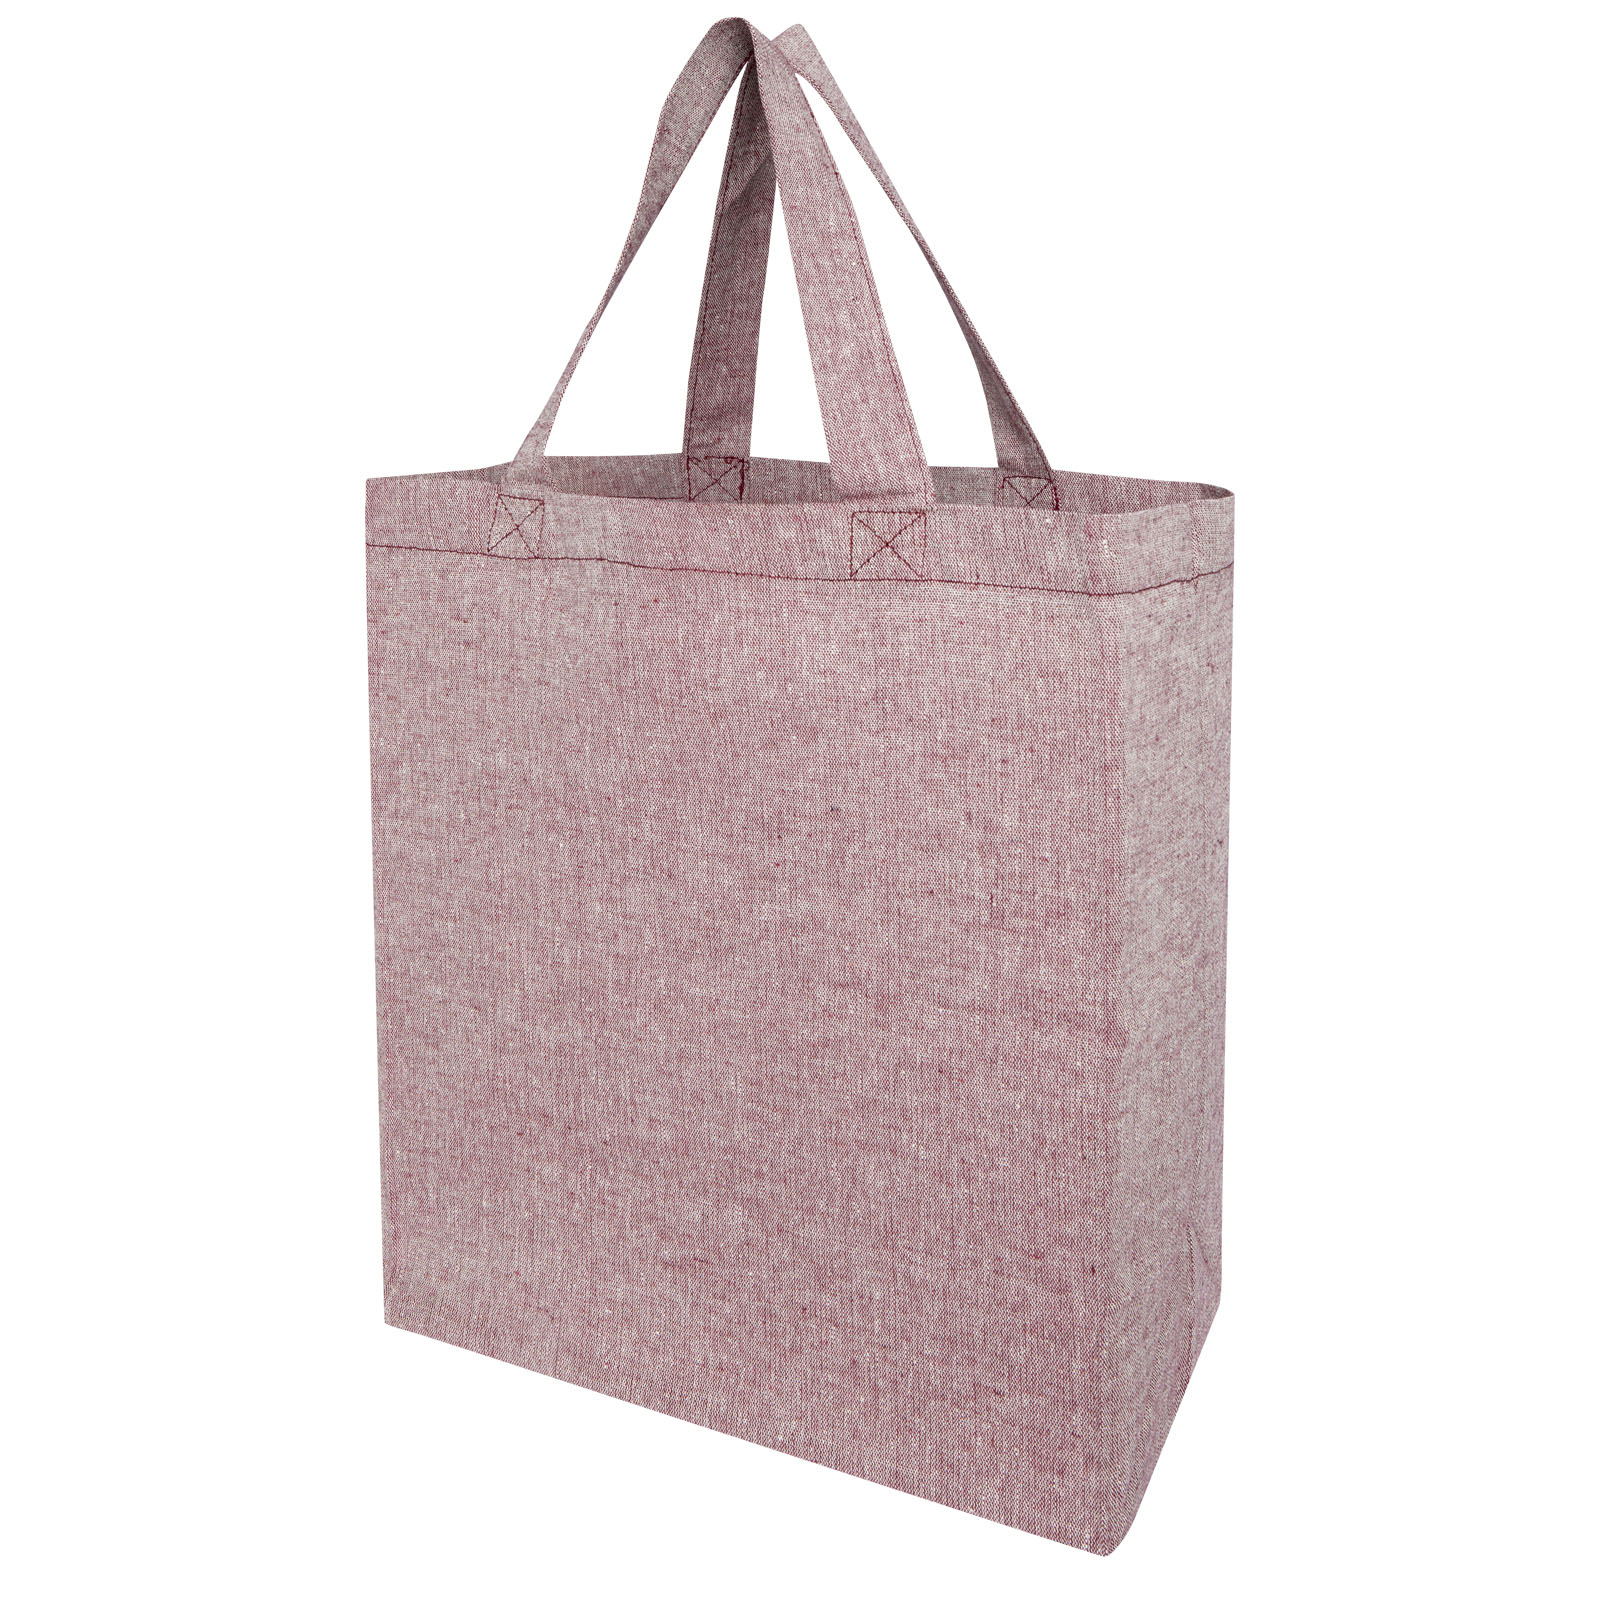 Shopping & Tote Bags - Pheebs 150 g/m² recycled gusset tote bag 13L